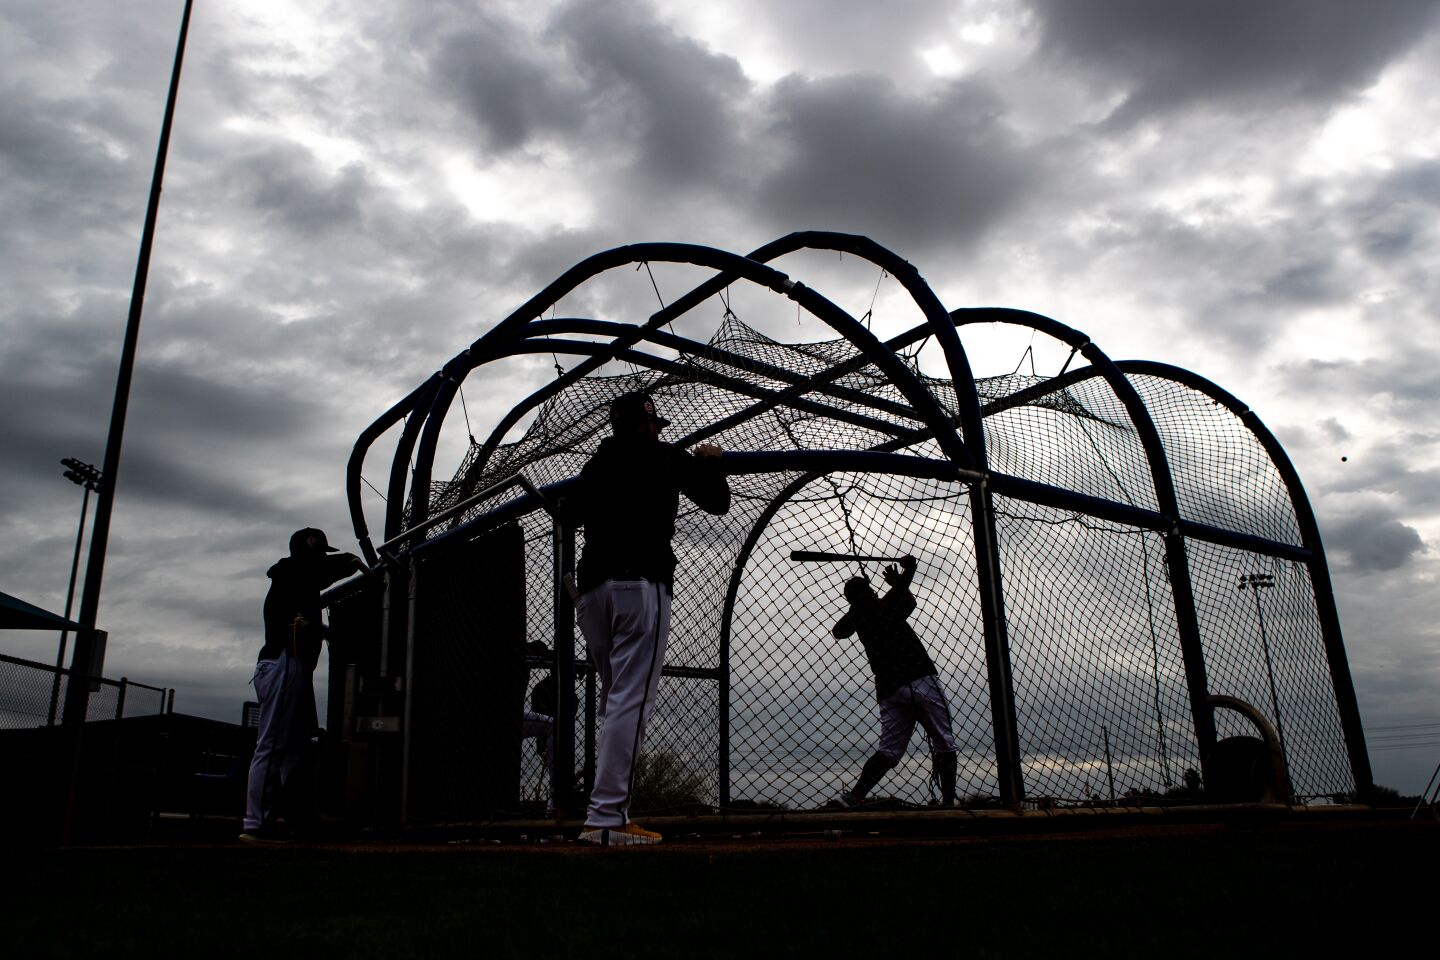 Padres center fielder Trent Grisham (1) bats during a spring training practice at the Peoria Sports Complex on Tuesday, Feb. 21, 2023 in Peoria, AZ.